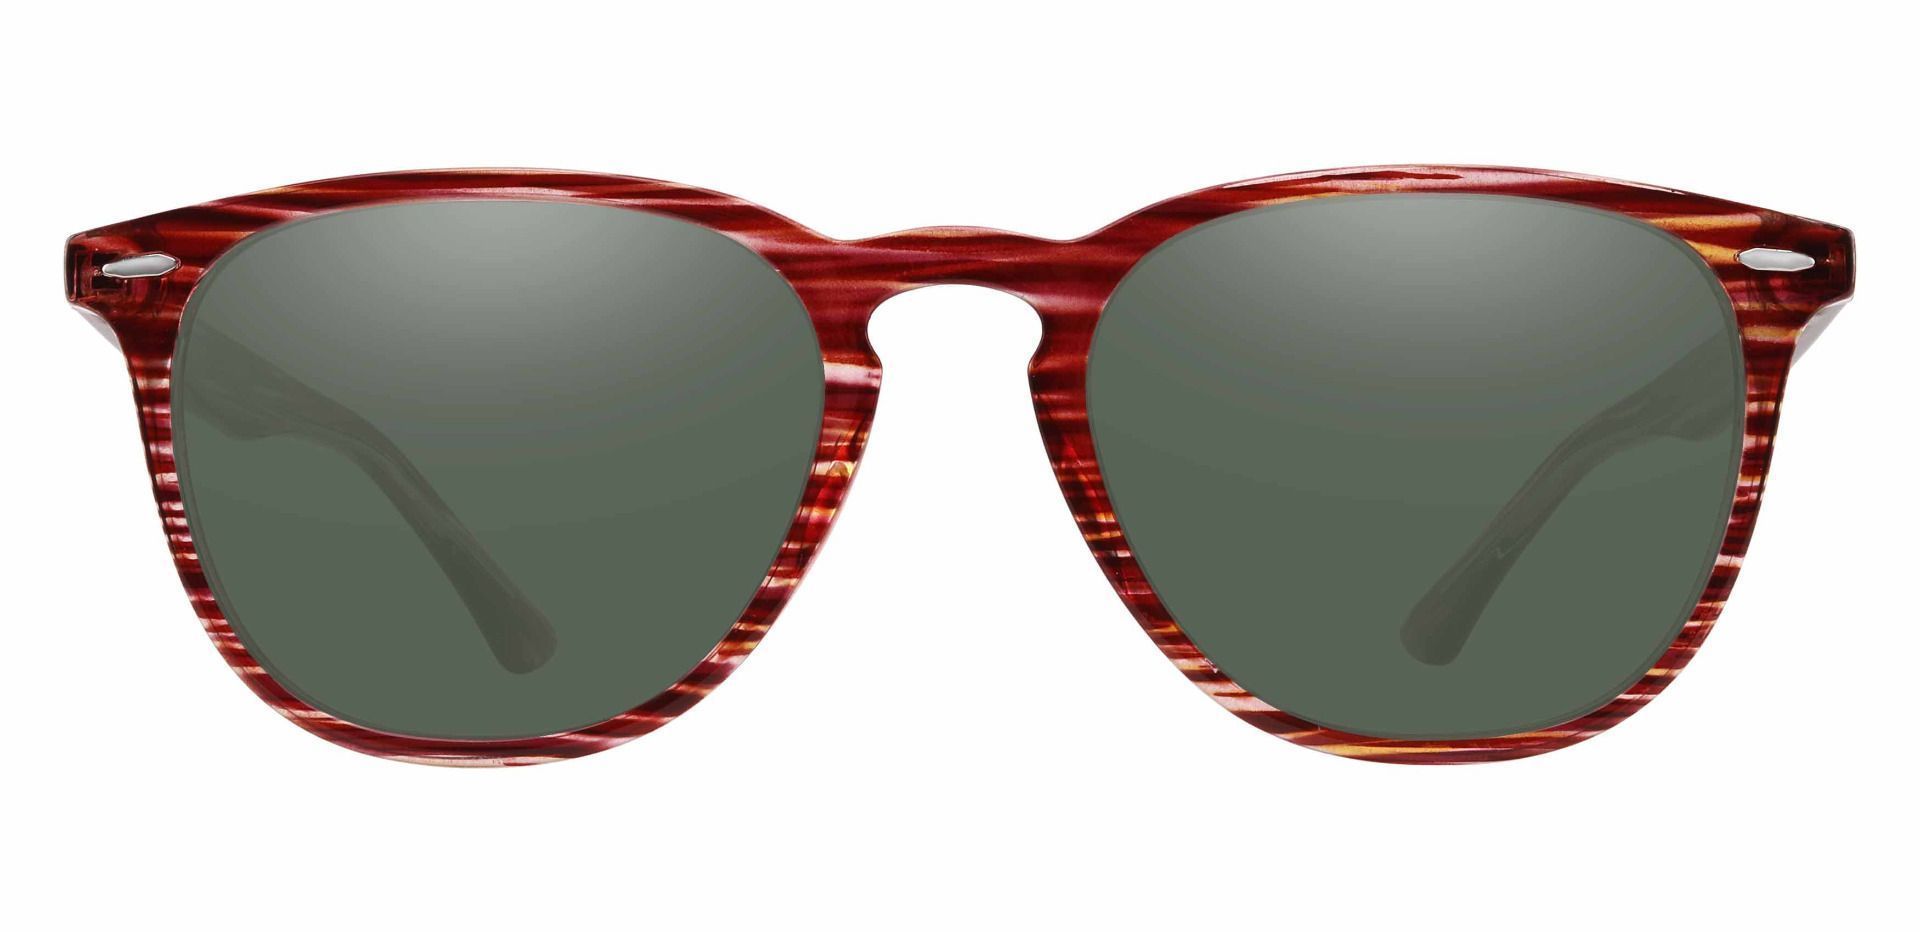 Sycamore Oval Prescription Sunglasses - Red Frame With Green Lenses